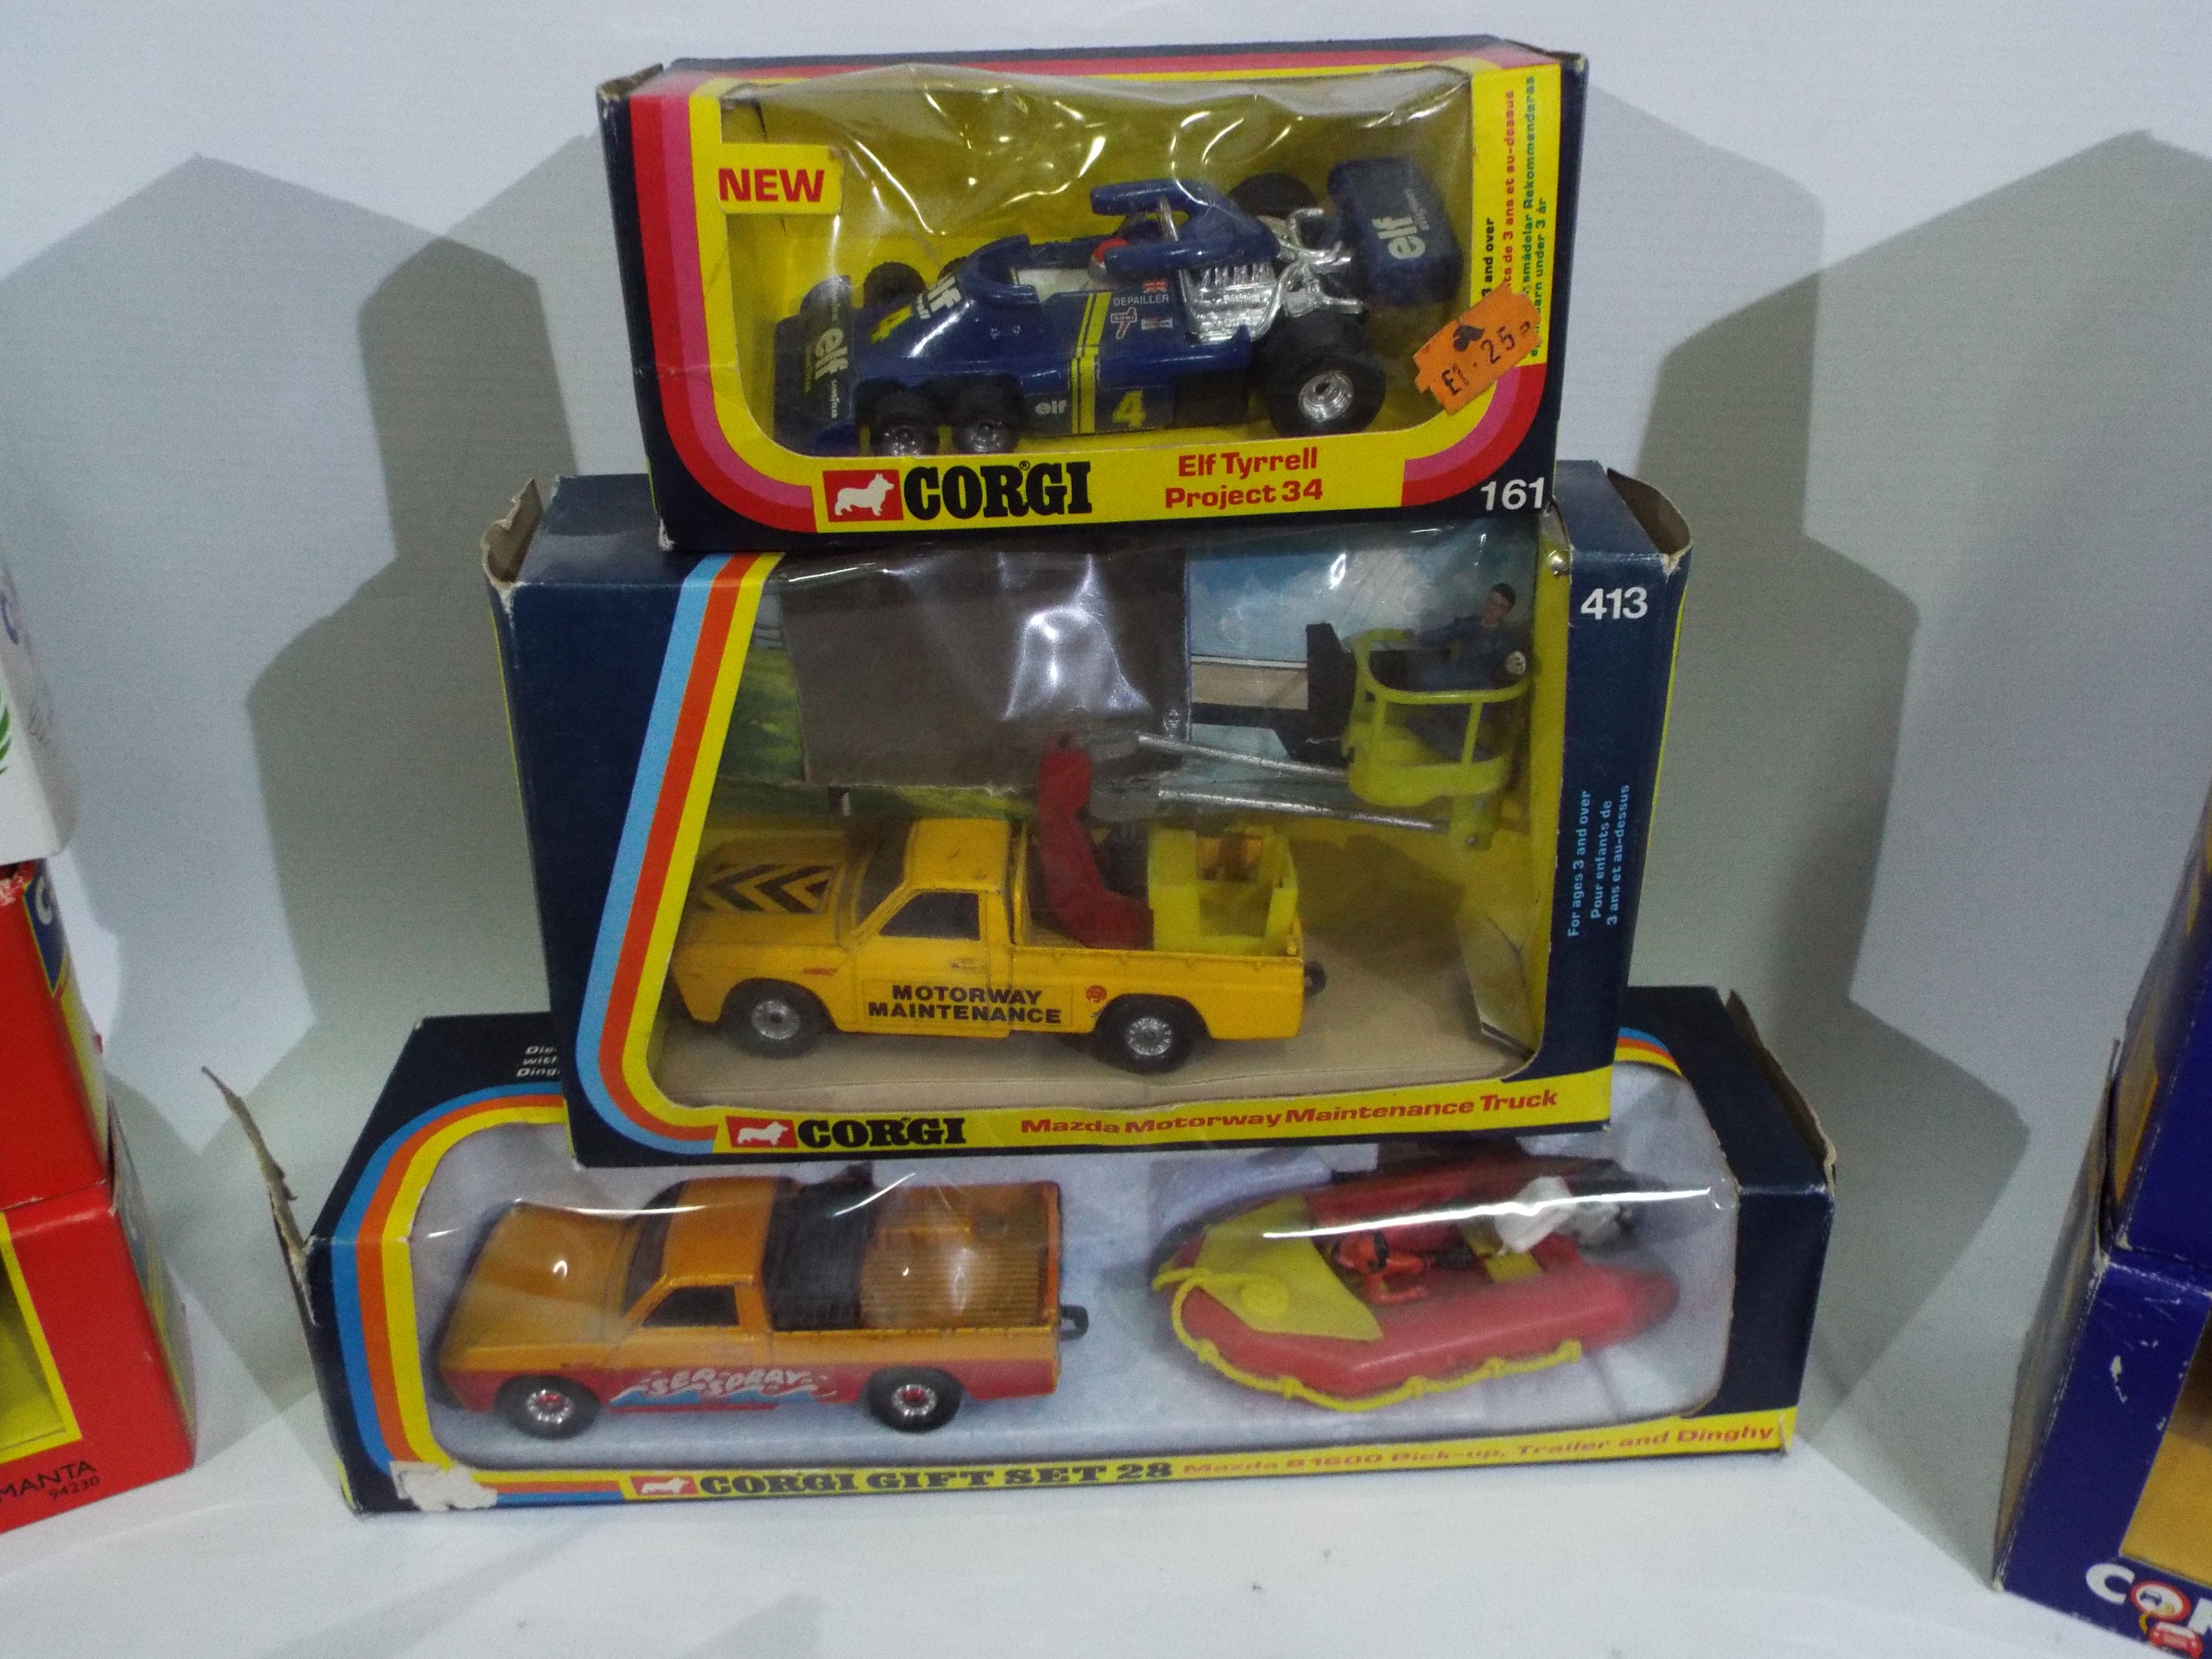 Corgi - 16 x boxed die-cast Corgi vehicles - Lot includes a 320 Ford Mustang, - Image 5 of 7